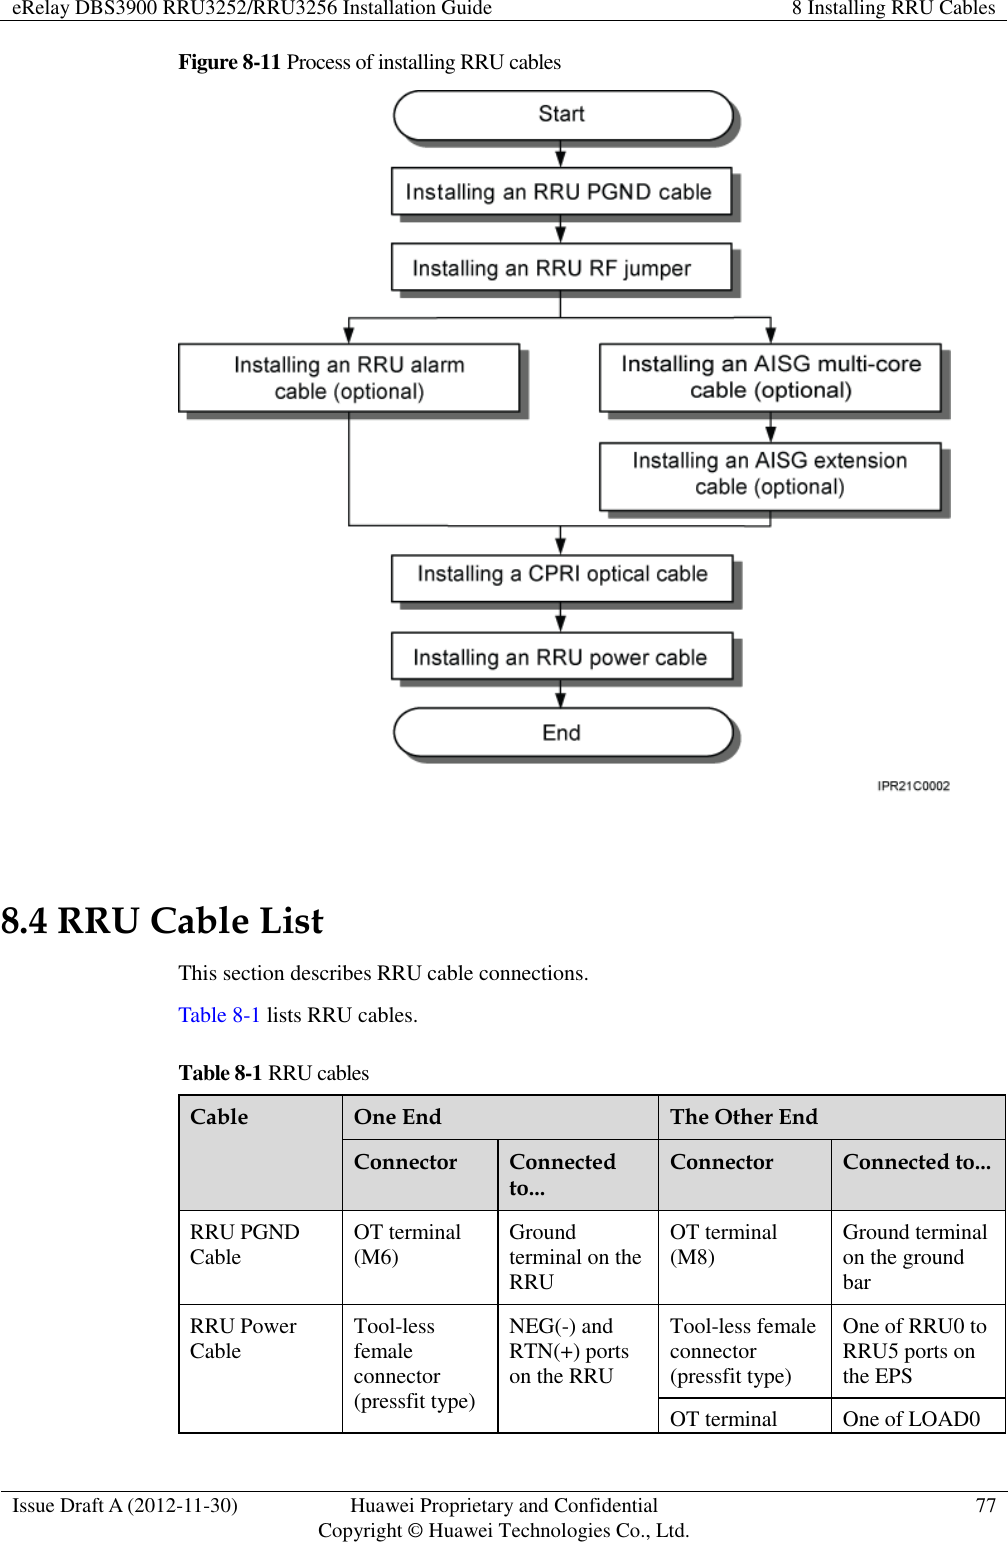 eRelay DBS3900 RRU3252/RRU3256 Installation Guide 8 Installing RRU Cables  Issue Draft A (2012-11-30) Huawei Proprietary and Confidential                                     Copyright © Huawei Technologies Co., Ltd. 77  Figure 8-11 Process of installing RRU cables   8.4 RRU Cable List This section describes RRU cable connections. Table 8-1 lists RRU cables. Table 8-1 RRU cables Cable One End The Other End Connector Connected to... Connector Connected to... RRU PGND Cable OT terminal (M6) Ground terminal on the RRU OT terminal (M8) Ground terminal on the ground bar RRU Power Cable Tool-less female connector (pressfit type) NEG(-) and RTN(+) ports on the RRU Tool-less female connector (pressfit type) One of RRU0 to RRU5 ports on the EPS OT terminal One of LOAD0 